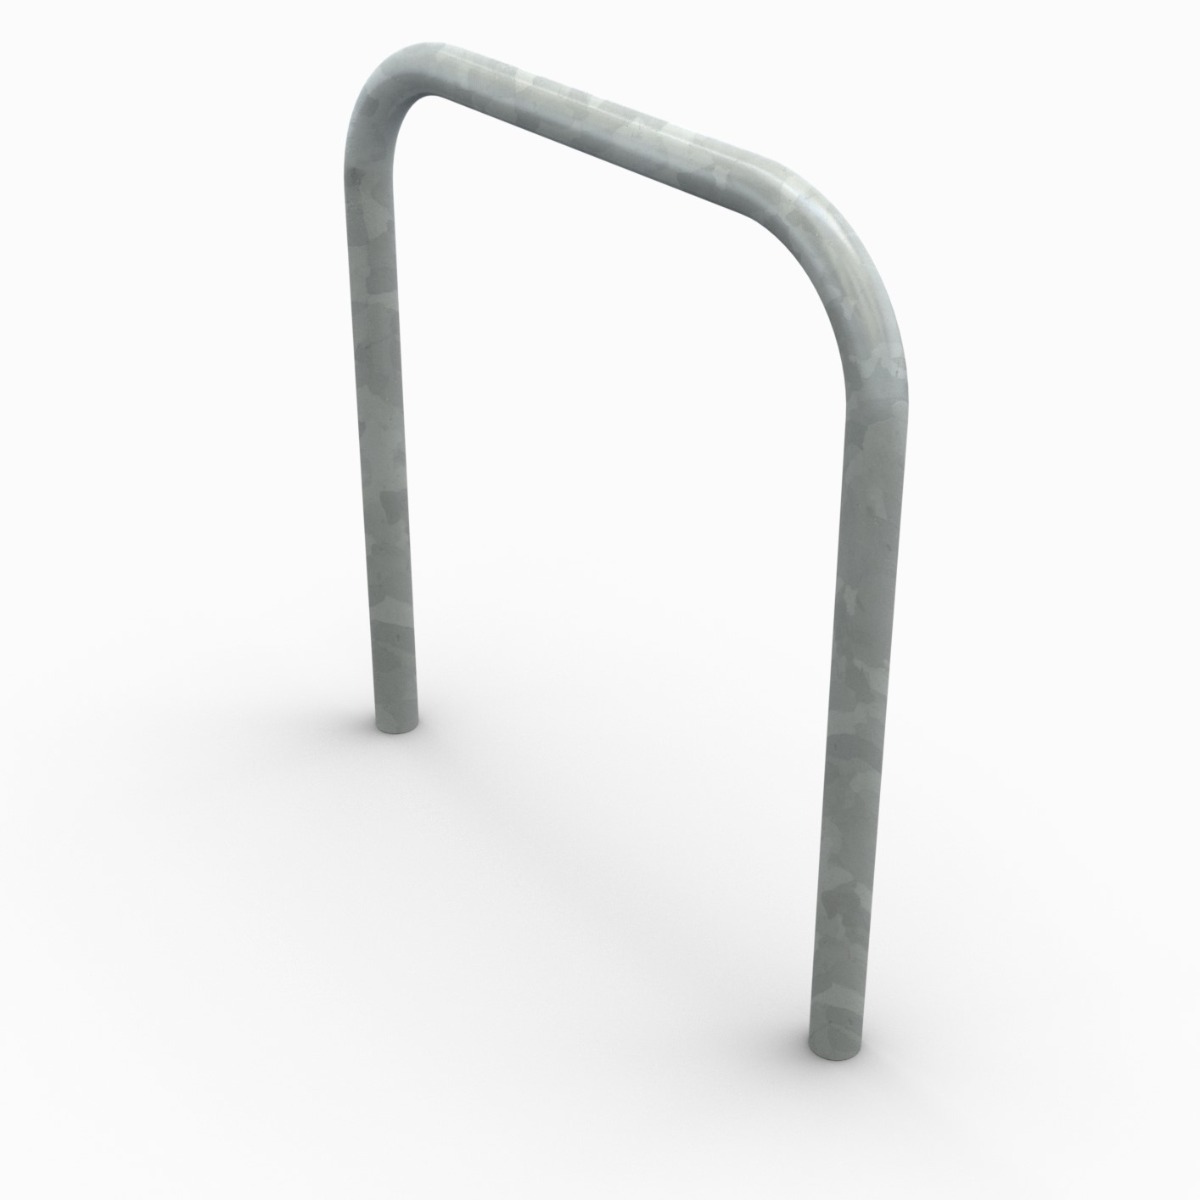 cycle stand for bike